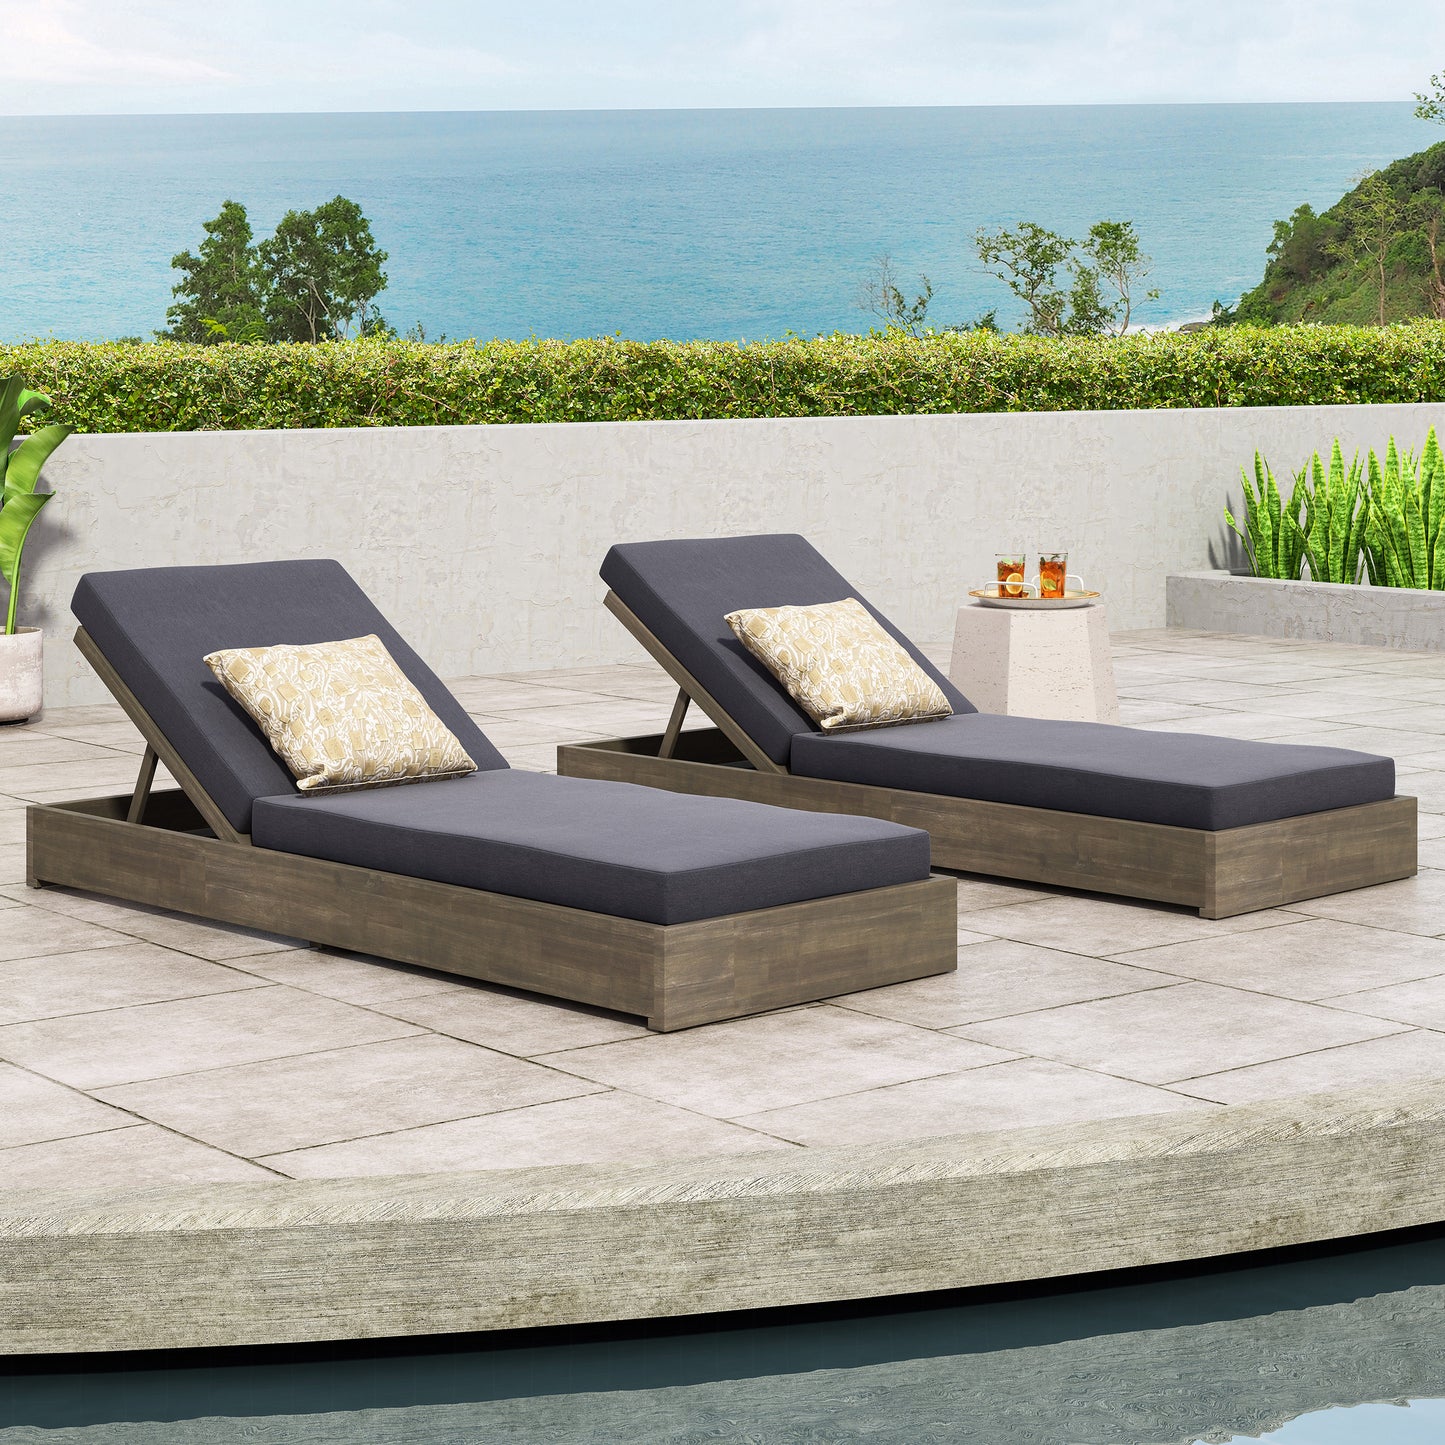 Niyanna Outdoor Acacia Wood Chaise Lounge with Cushion (Set of 2)